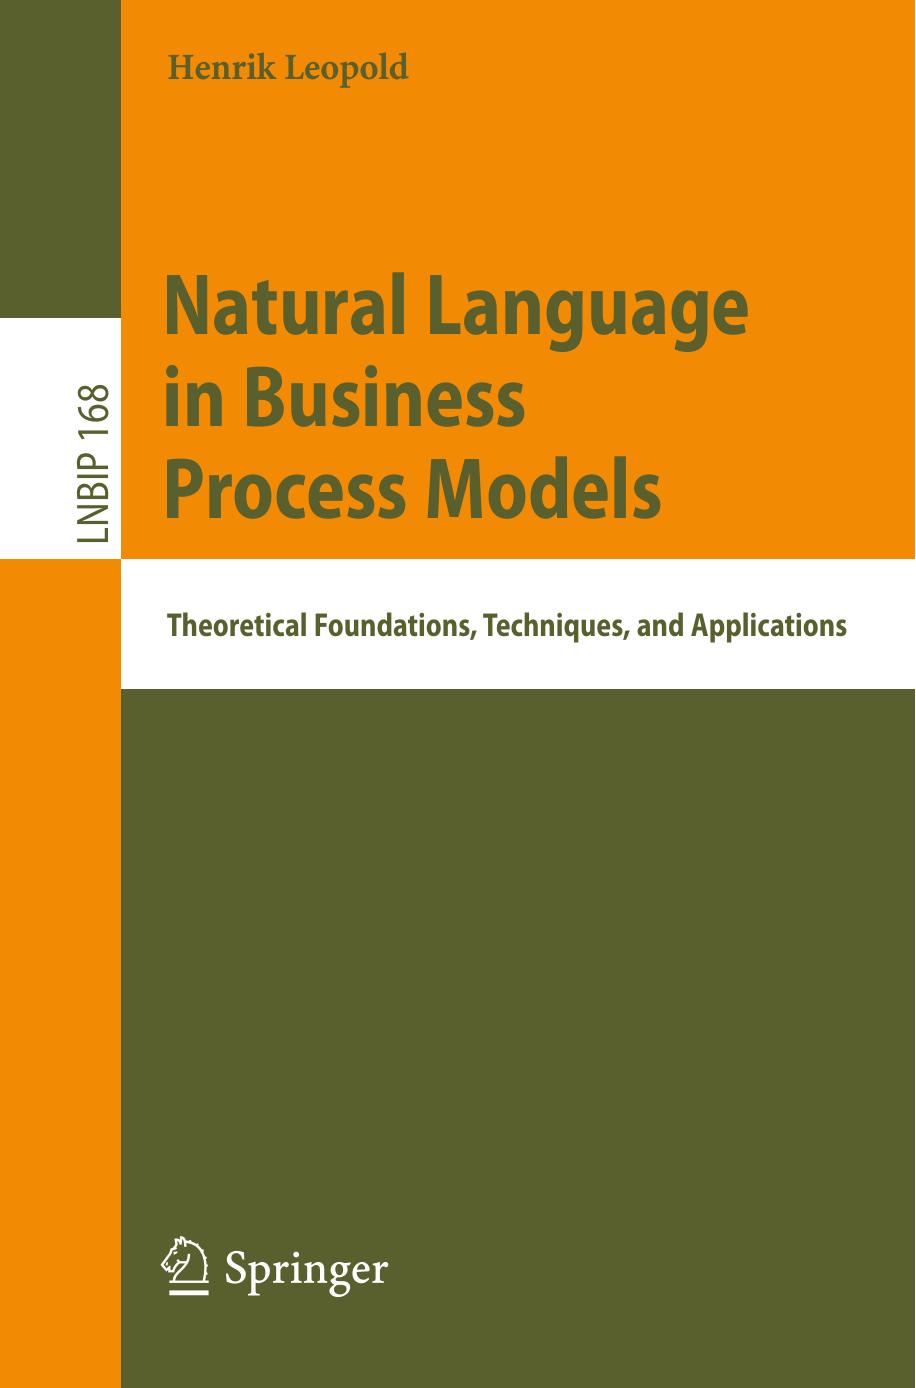 Natural Language in Business Process Models: Theoretical Foundations, Techniques, and Applications